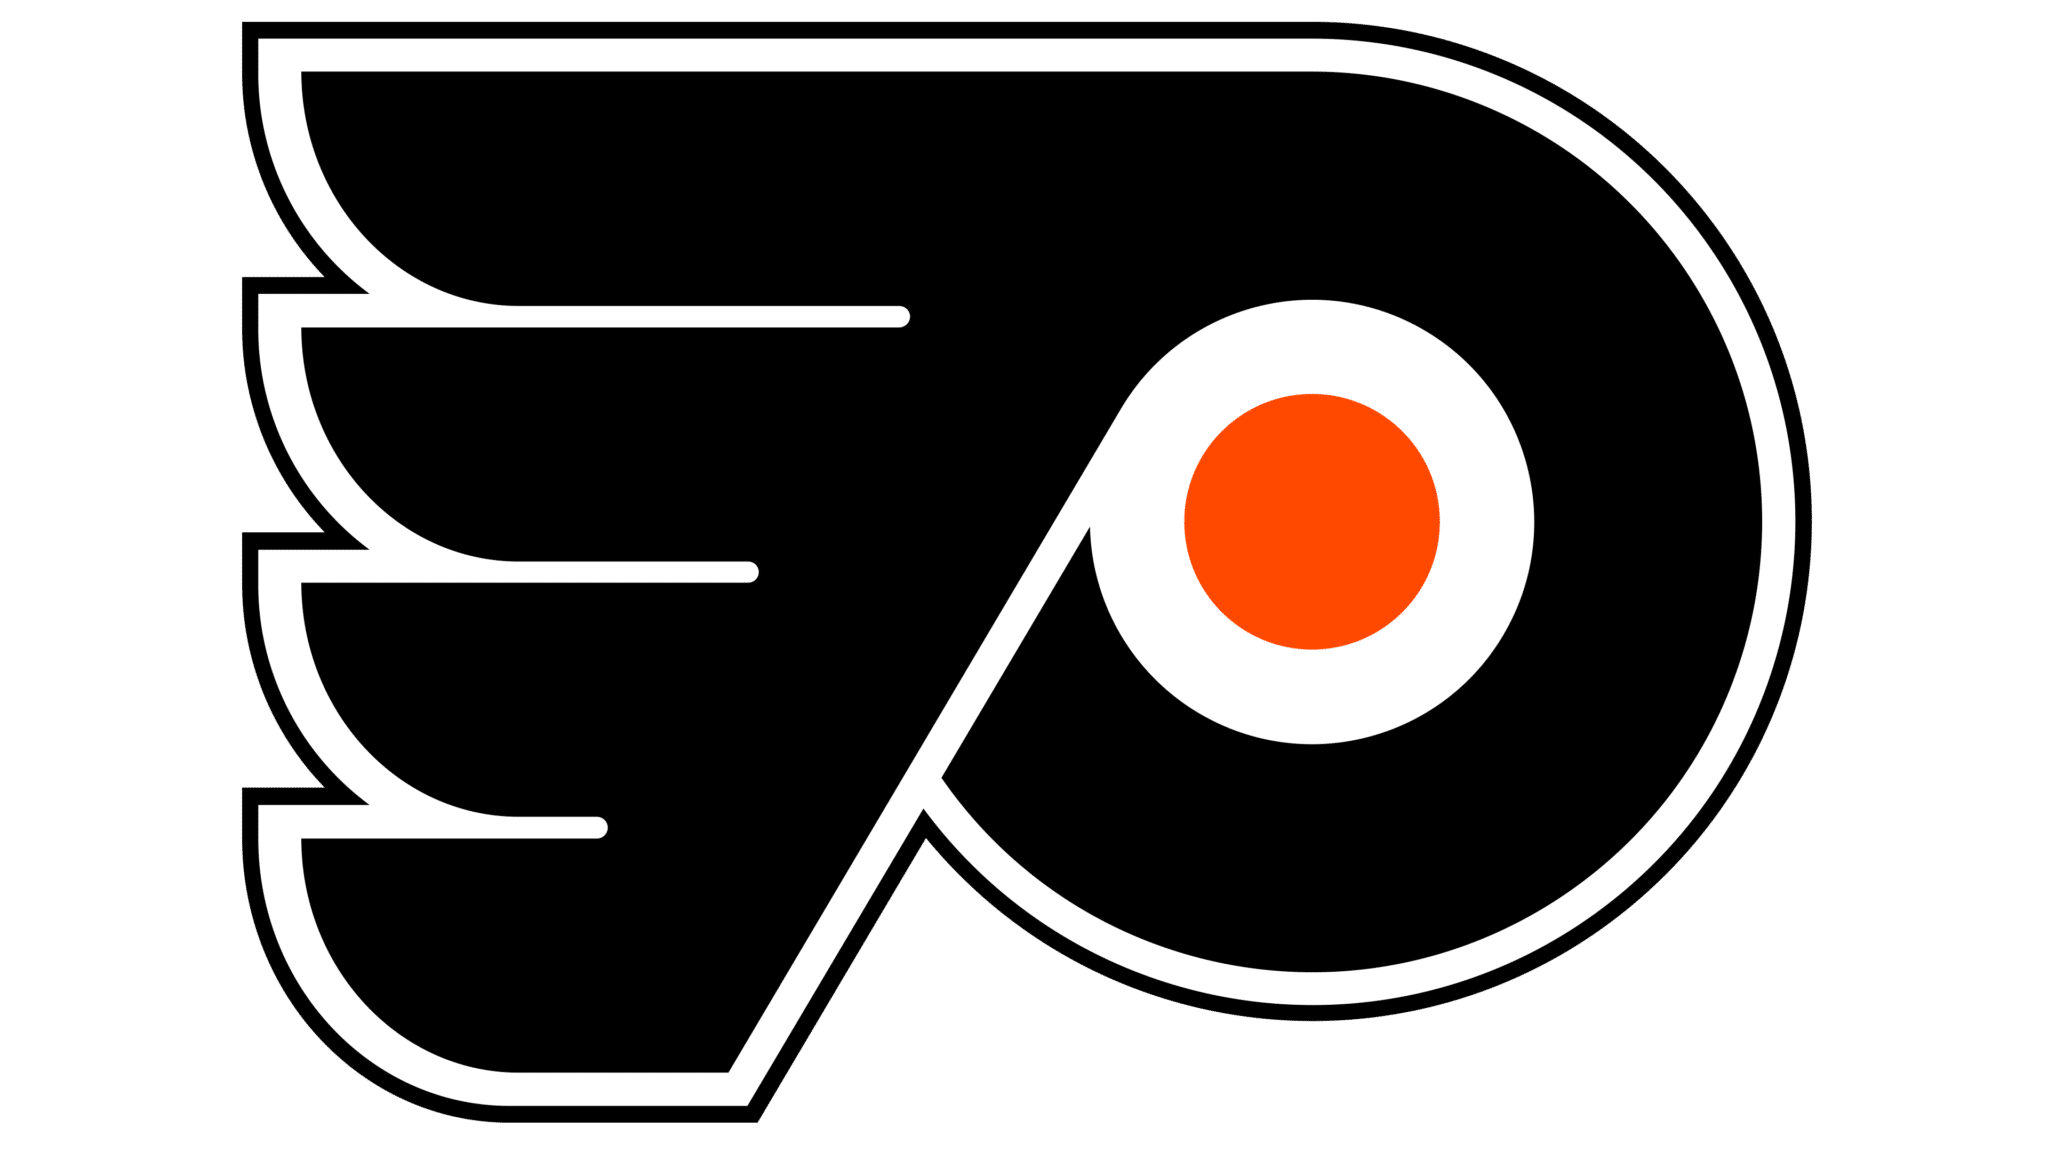 Here’s the Flyers’ Updated COVID-19 Ticket Policy